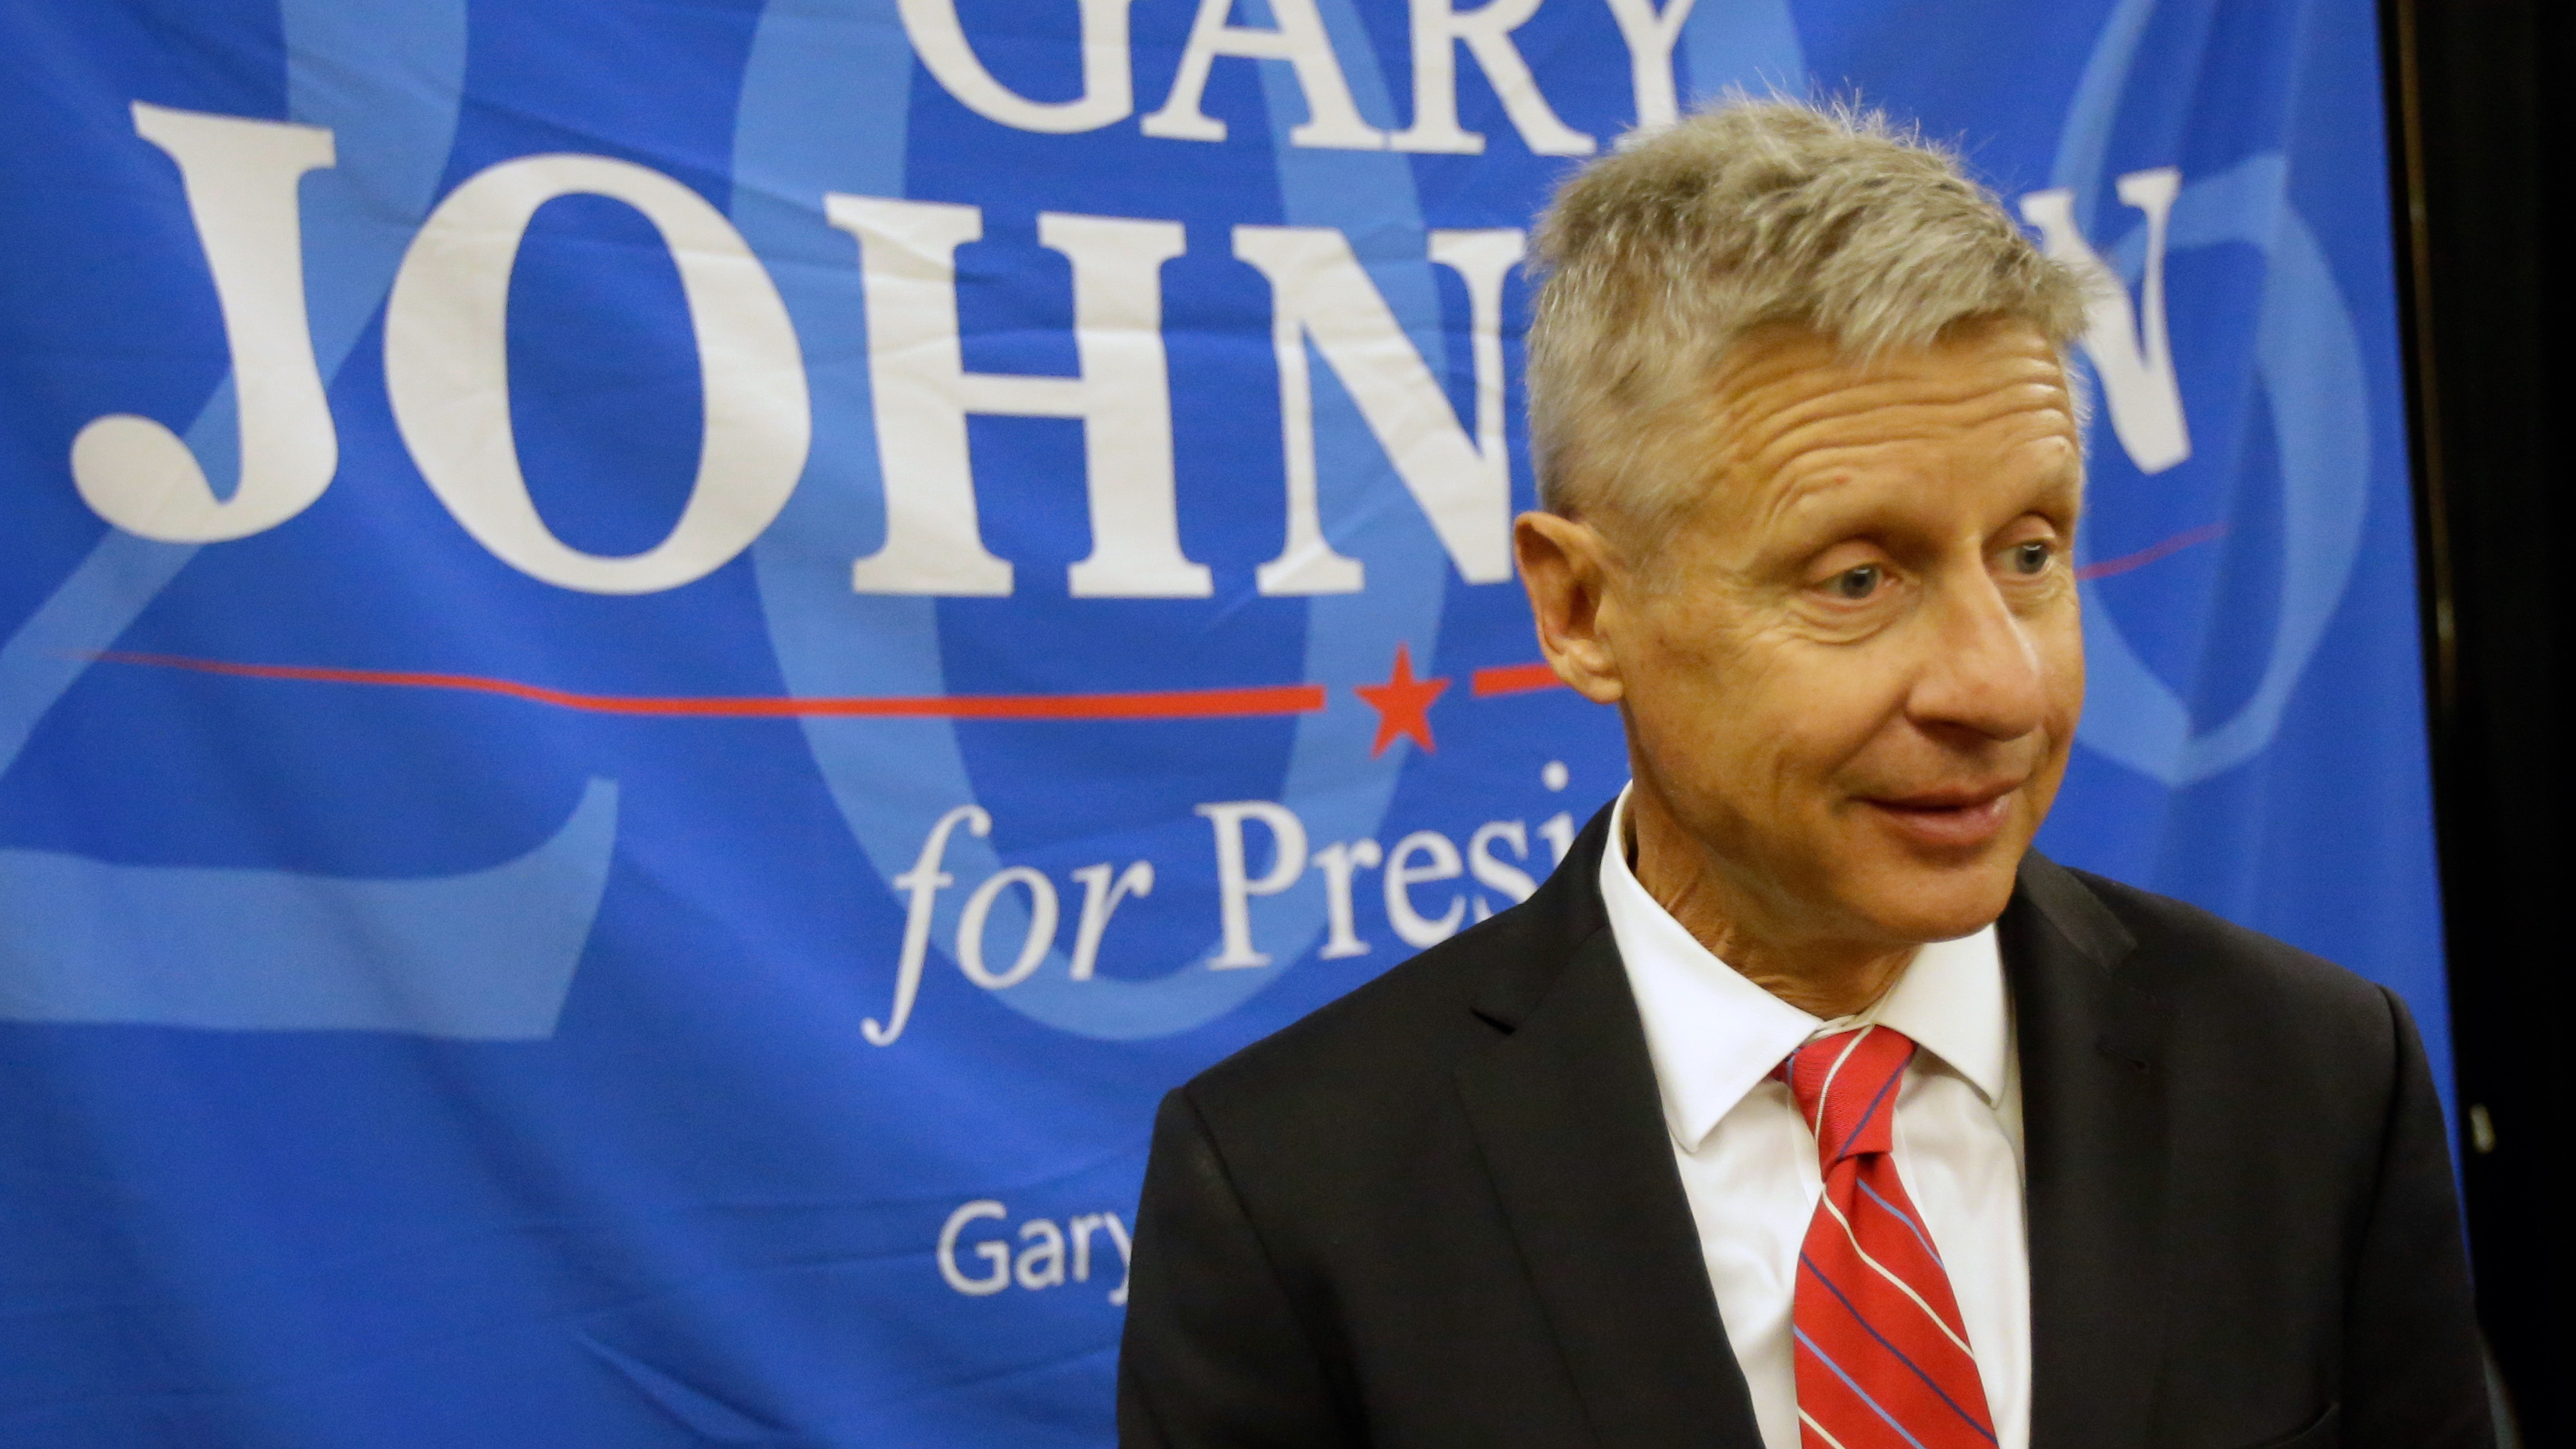 Libertarian presidential candidate Gary Johnson needs to get to 15 percent in polls to make it onto the debate stage this fall. (John Raoux, Associated Press)